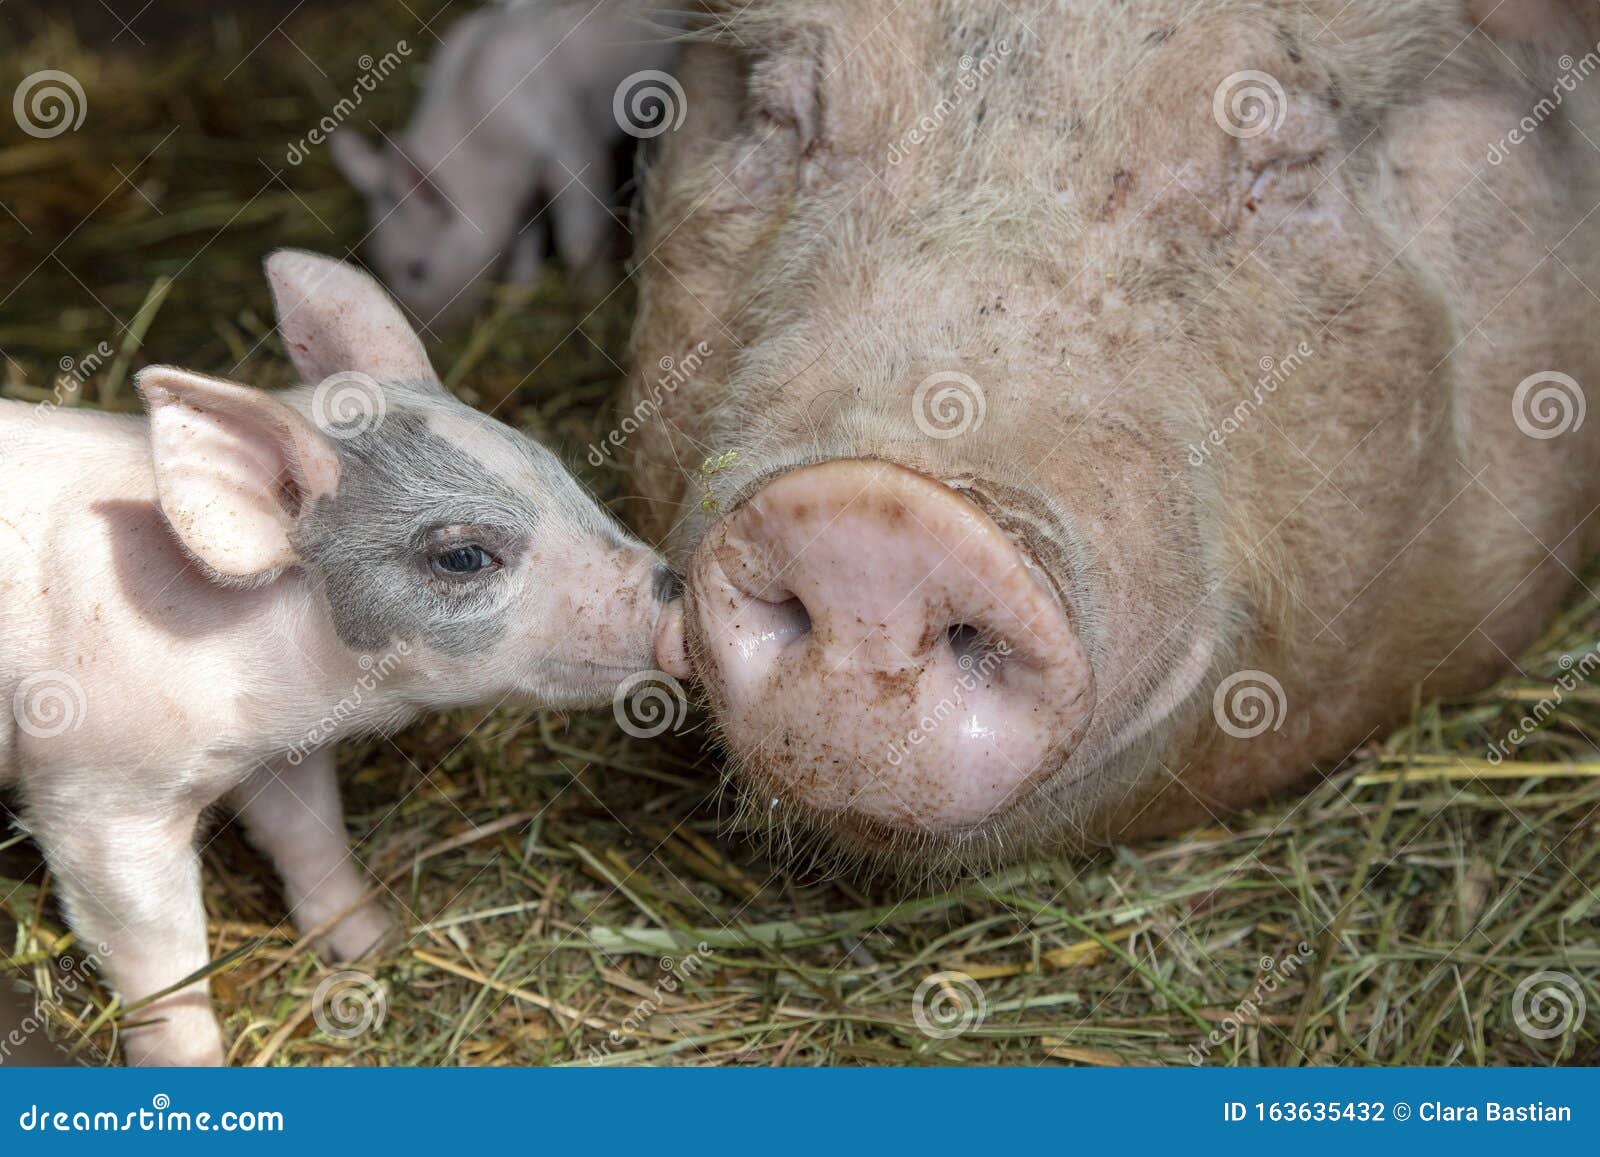 newborn tiny pink cute piglet with mini nose kisses huge nose of mother pig